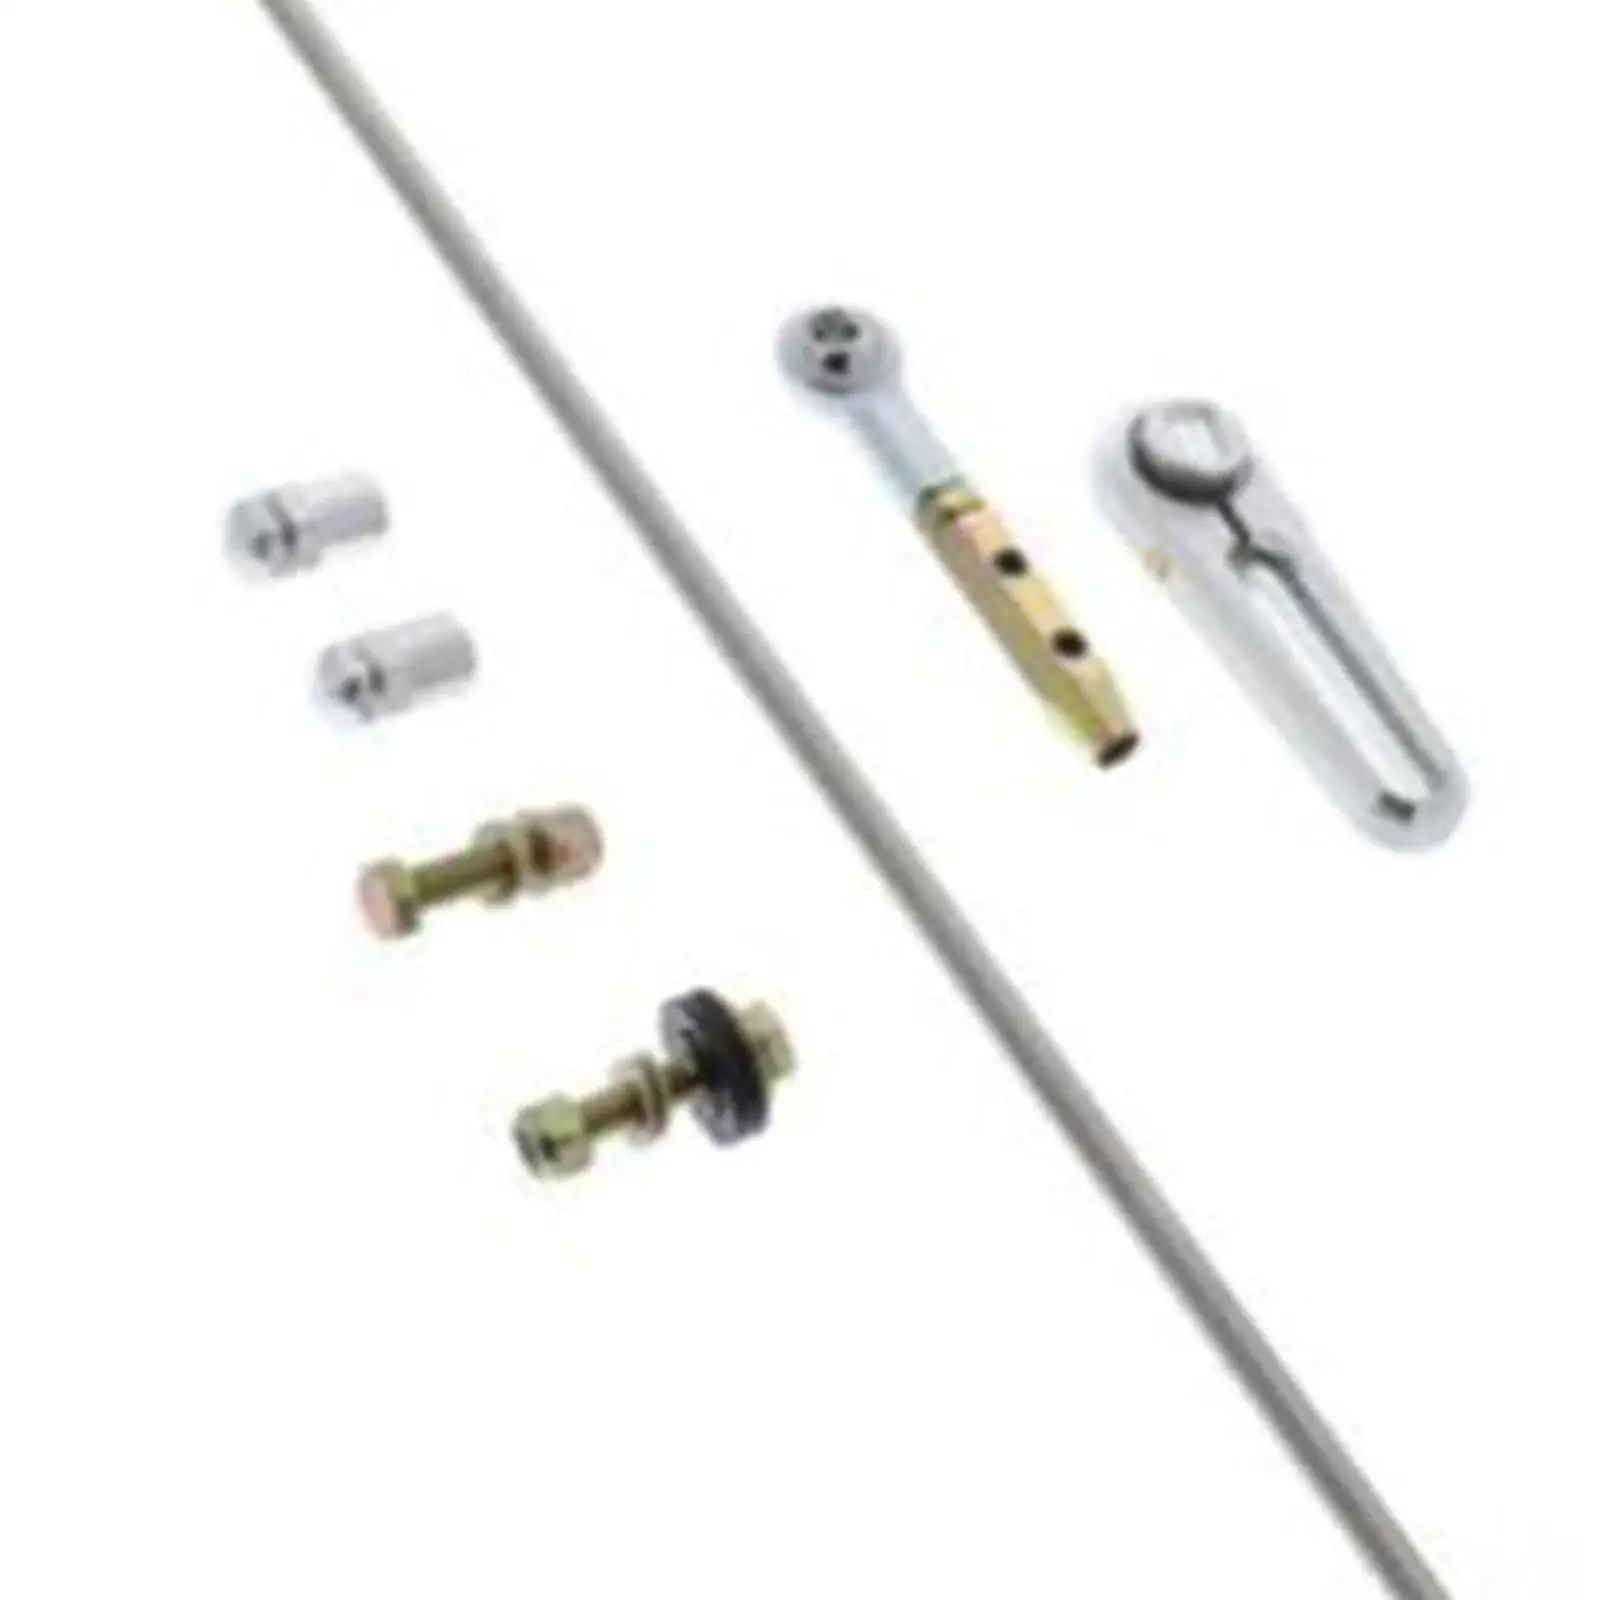 Transmission Shift Linkage Kit Wear Resistance Replacement for GM 700R4